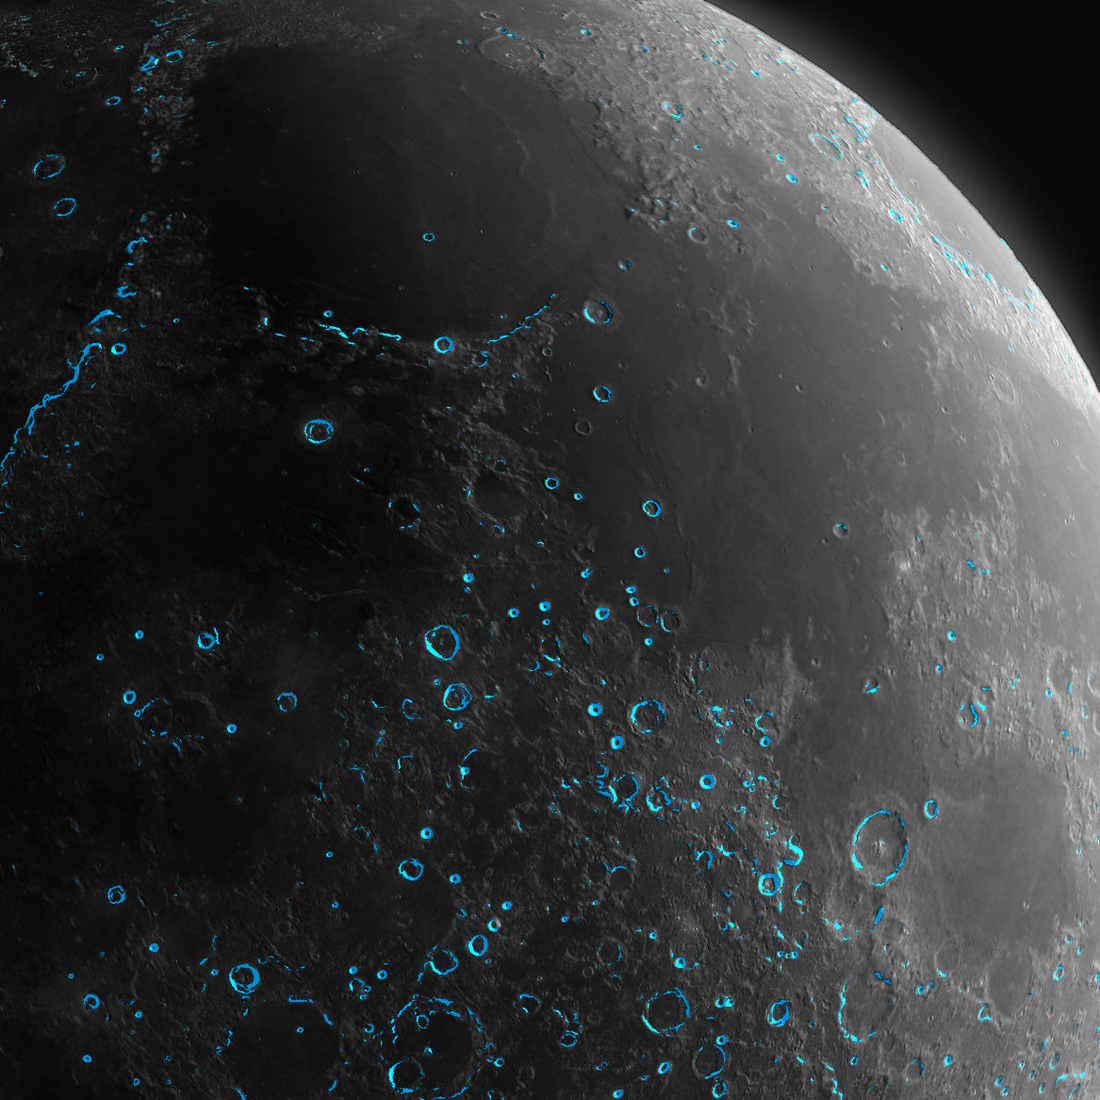 Lunar QuickMap 2020 update released with exciting new features and layer for enhanced customization and analysis.